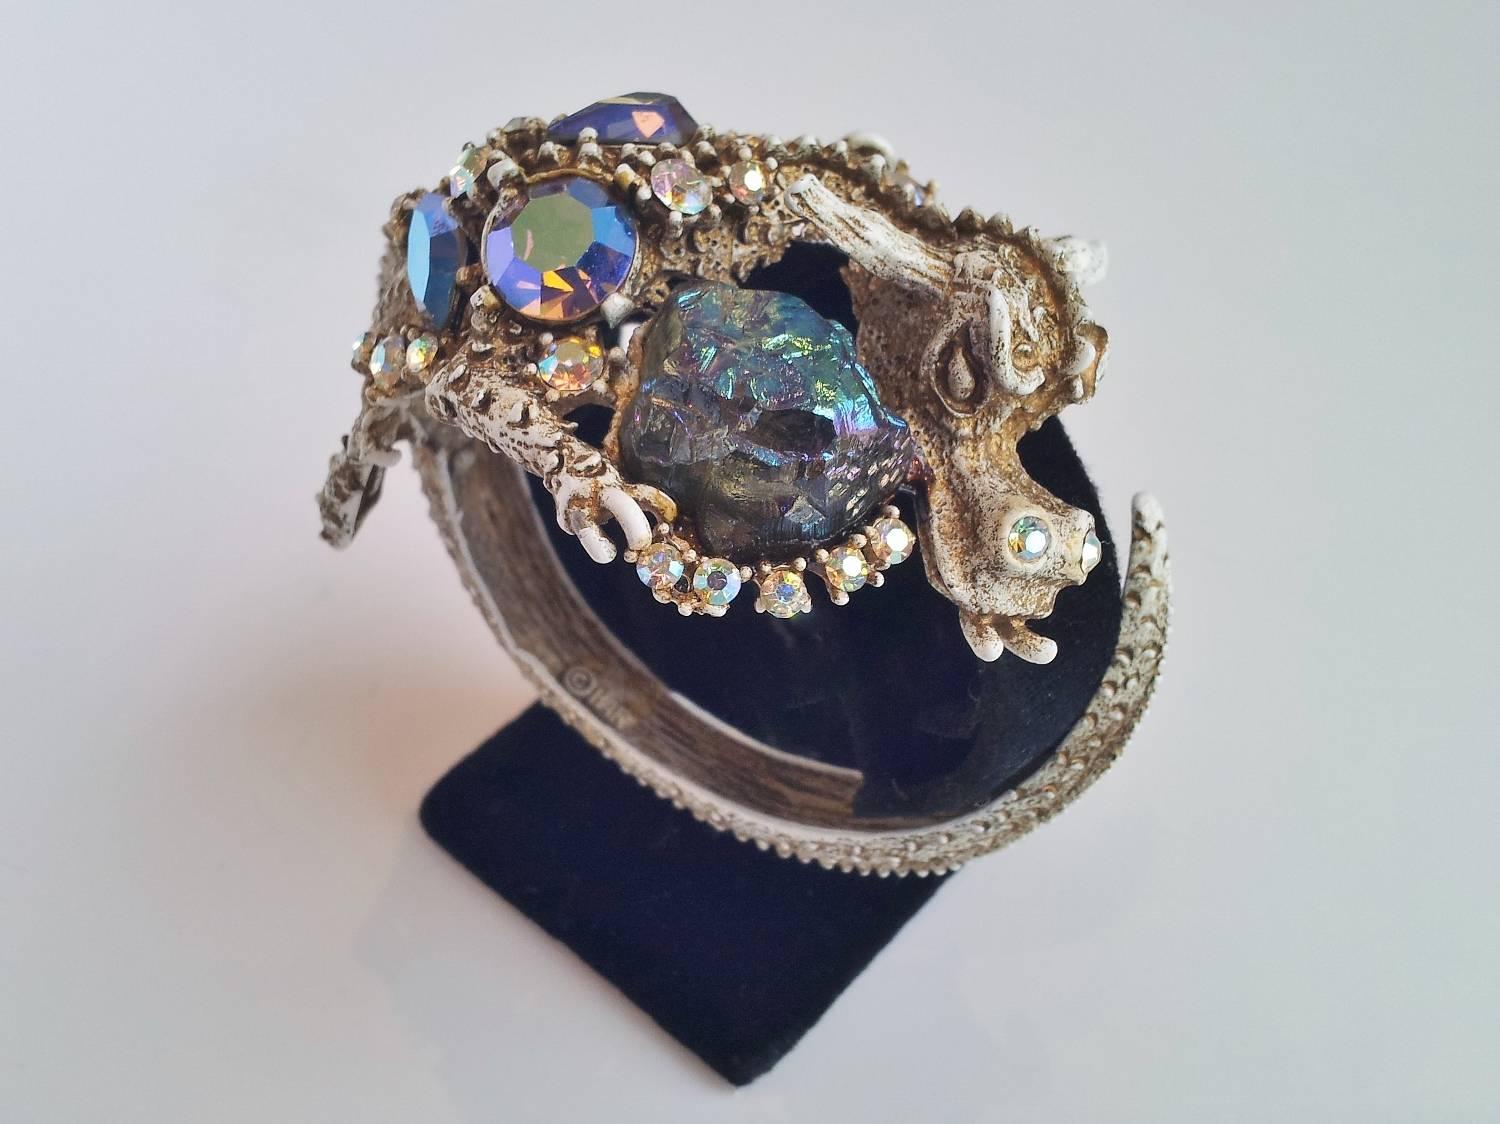 HAR vintage dragon hinged-clamper bangle bracelet and earrings, 1959, New York. The Dragon`s head predominates this bracelet which is encrusted with ‘Aurora borealis’ rhinestones and ‘lava rocks’ in various shapes, sizes and colours of green &